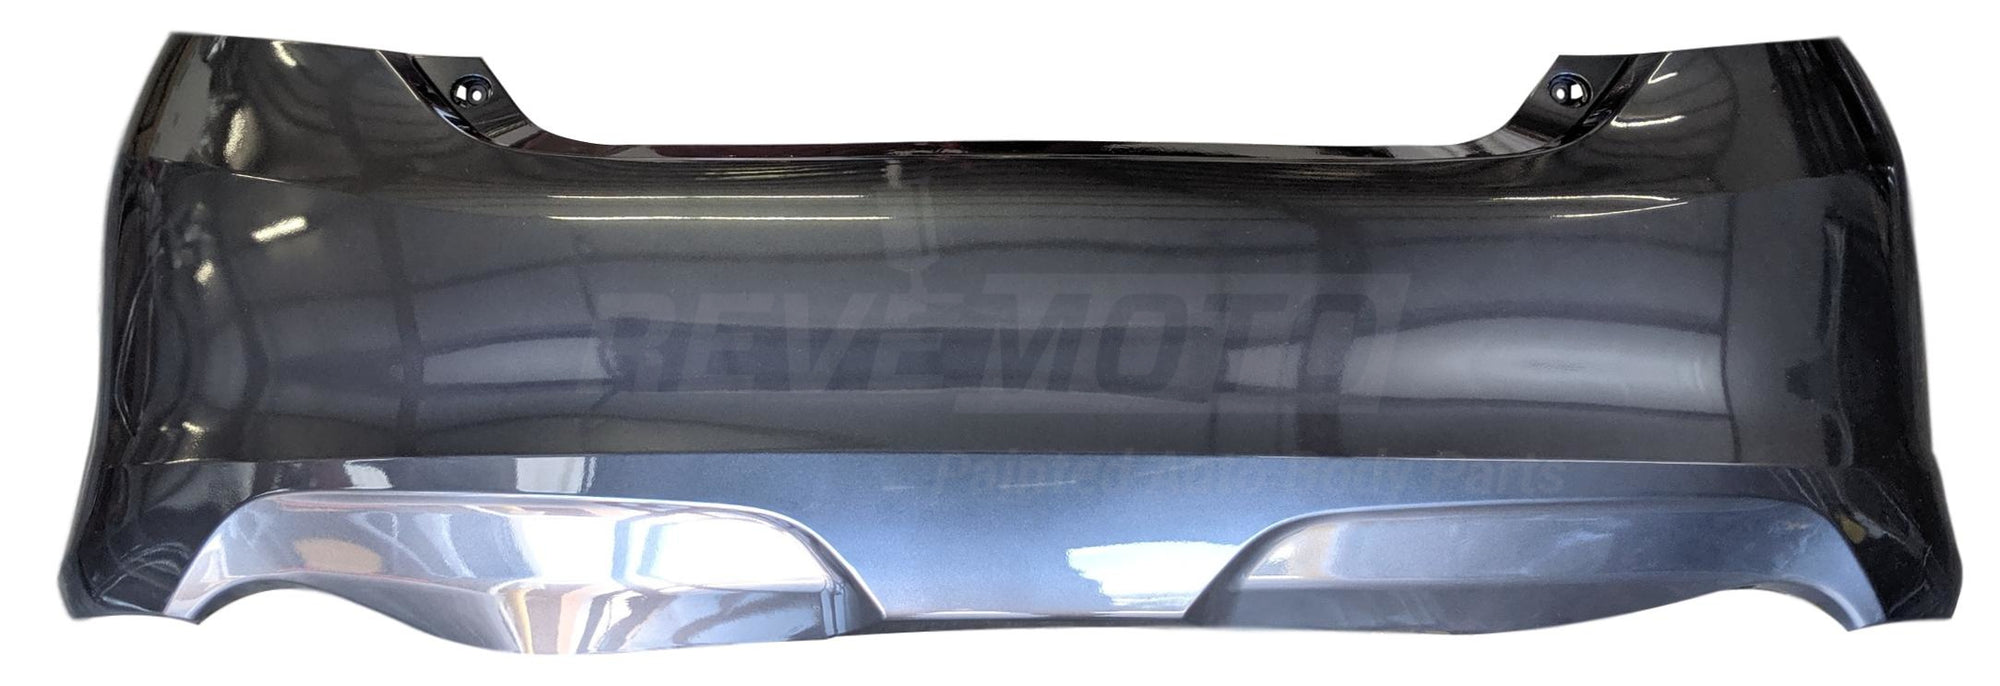 2012 Toyota Camry Rear Bumper Cover, SE ,SE Sport Models; Made of Plastic, Painted Magnetic Gray Metallic (1G3)